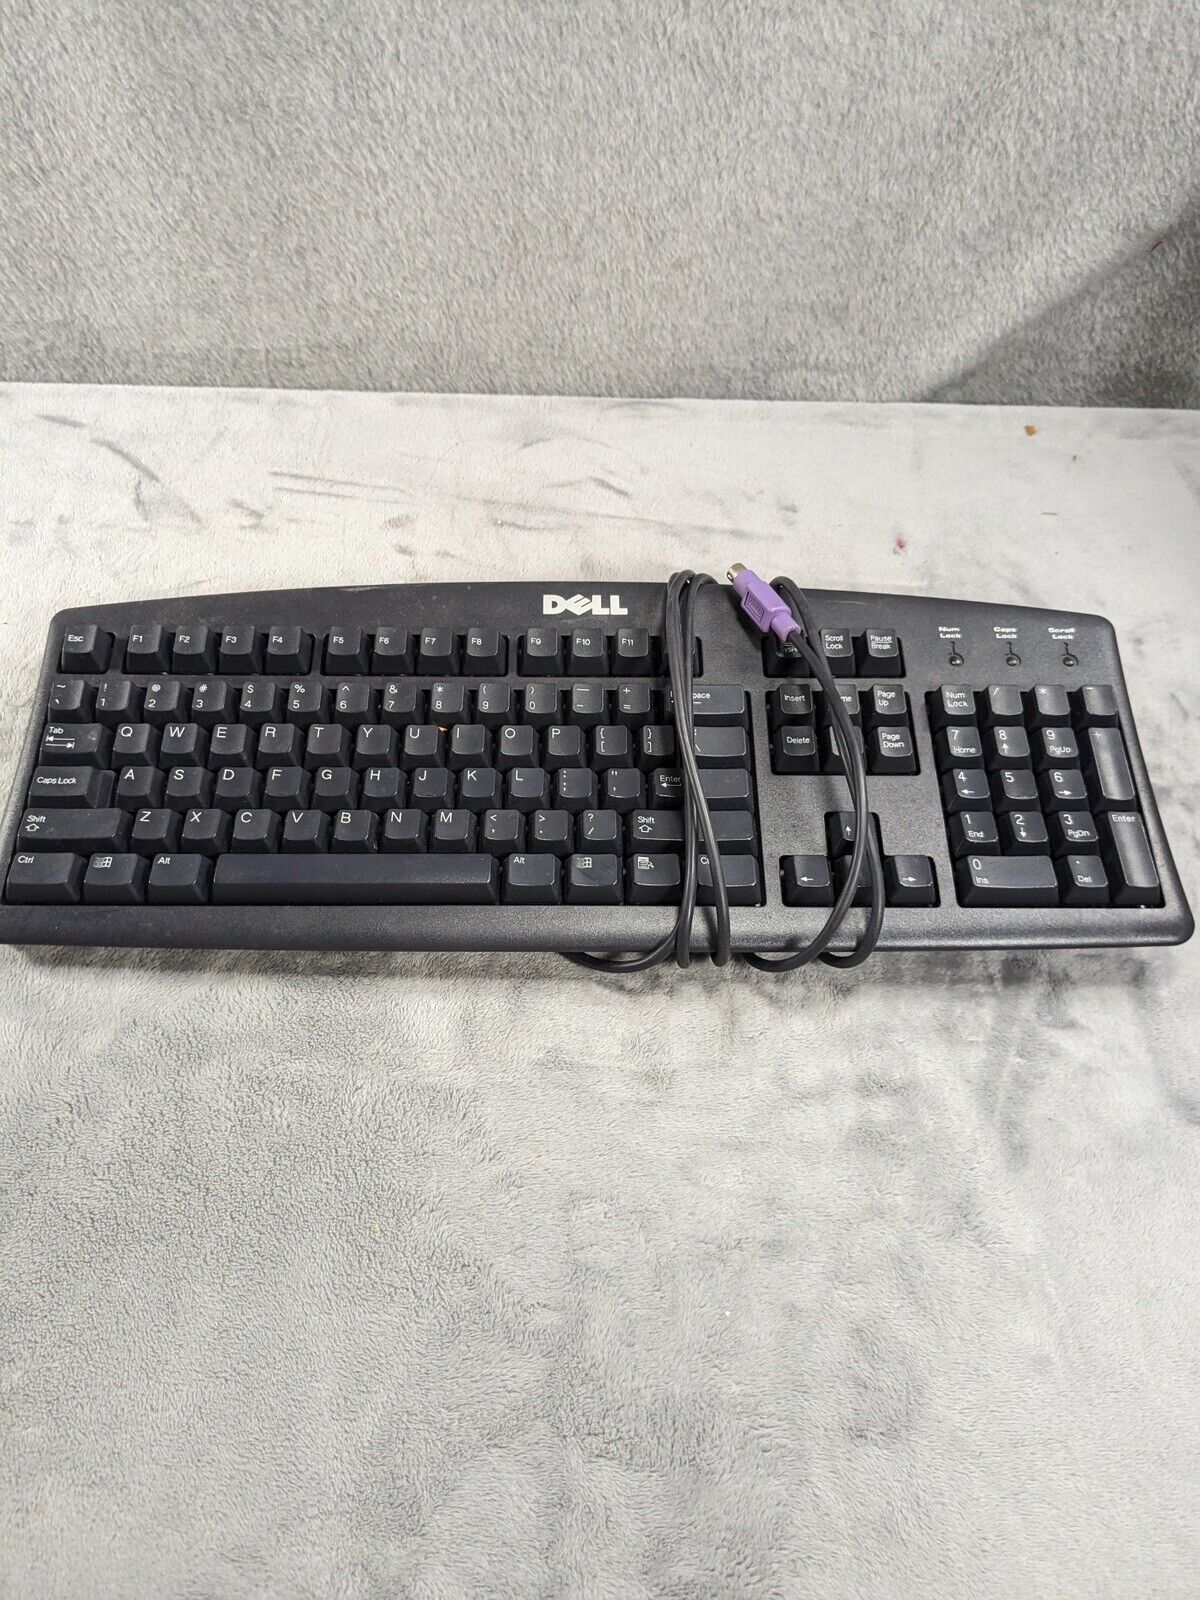 Dell PS2 Wired Computer Keyboard Model #SK-8110 BLACK TESTED AND WORKING